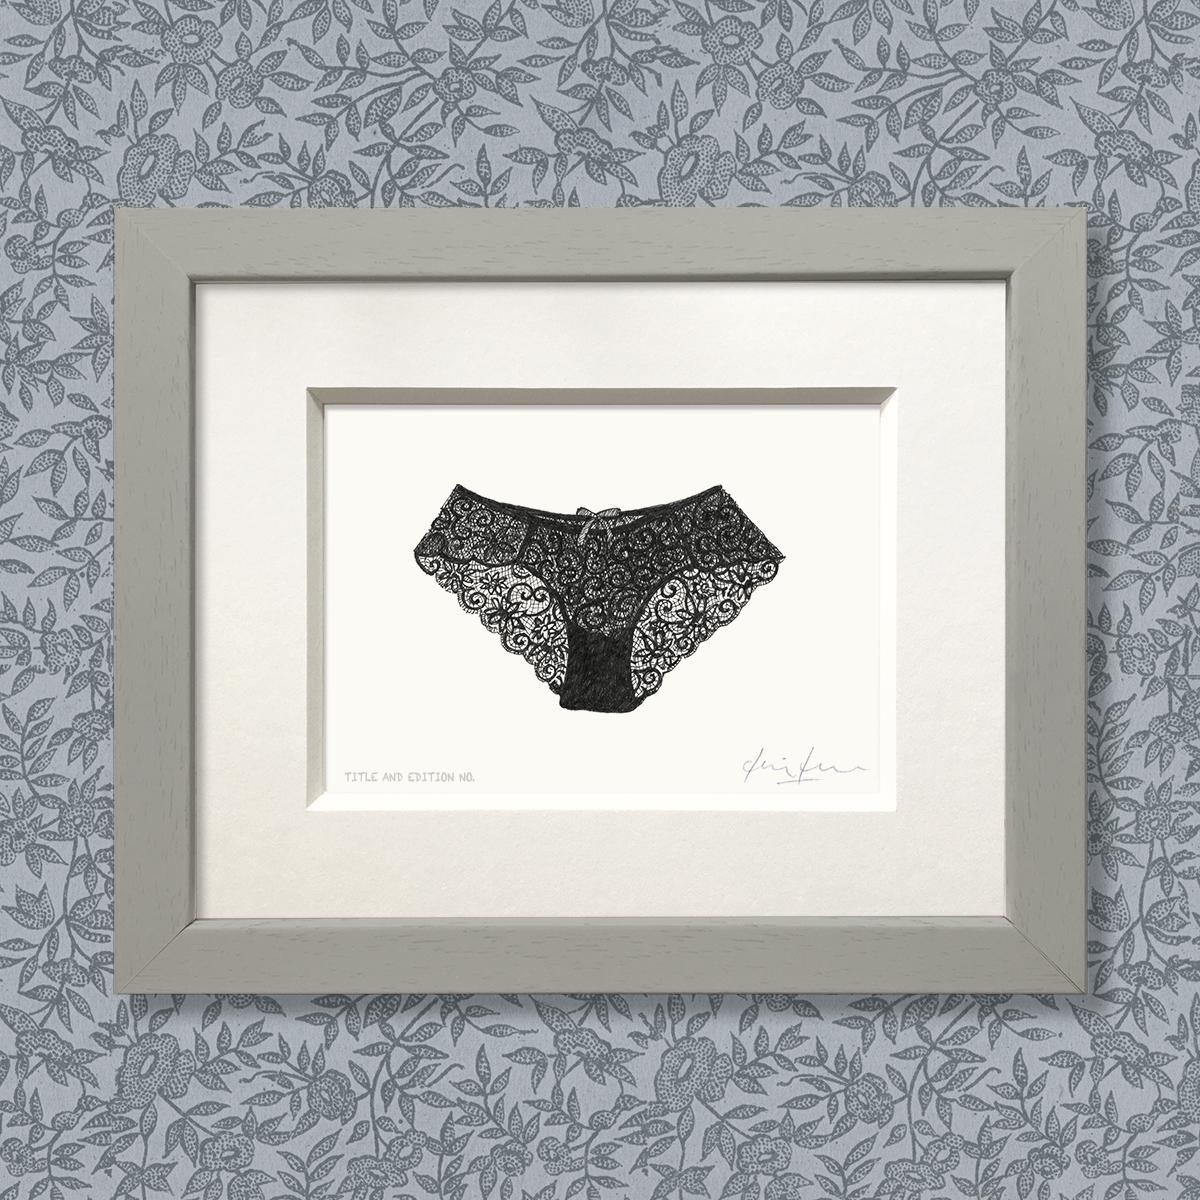 Limited edition print from pen and ink drawing of a pair of lacy knickers in a grey frame